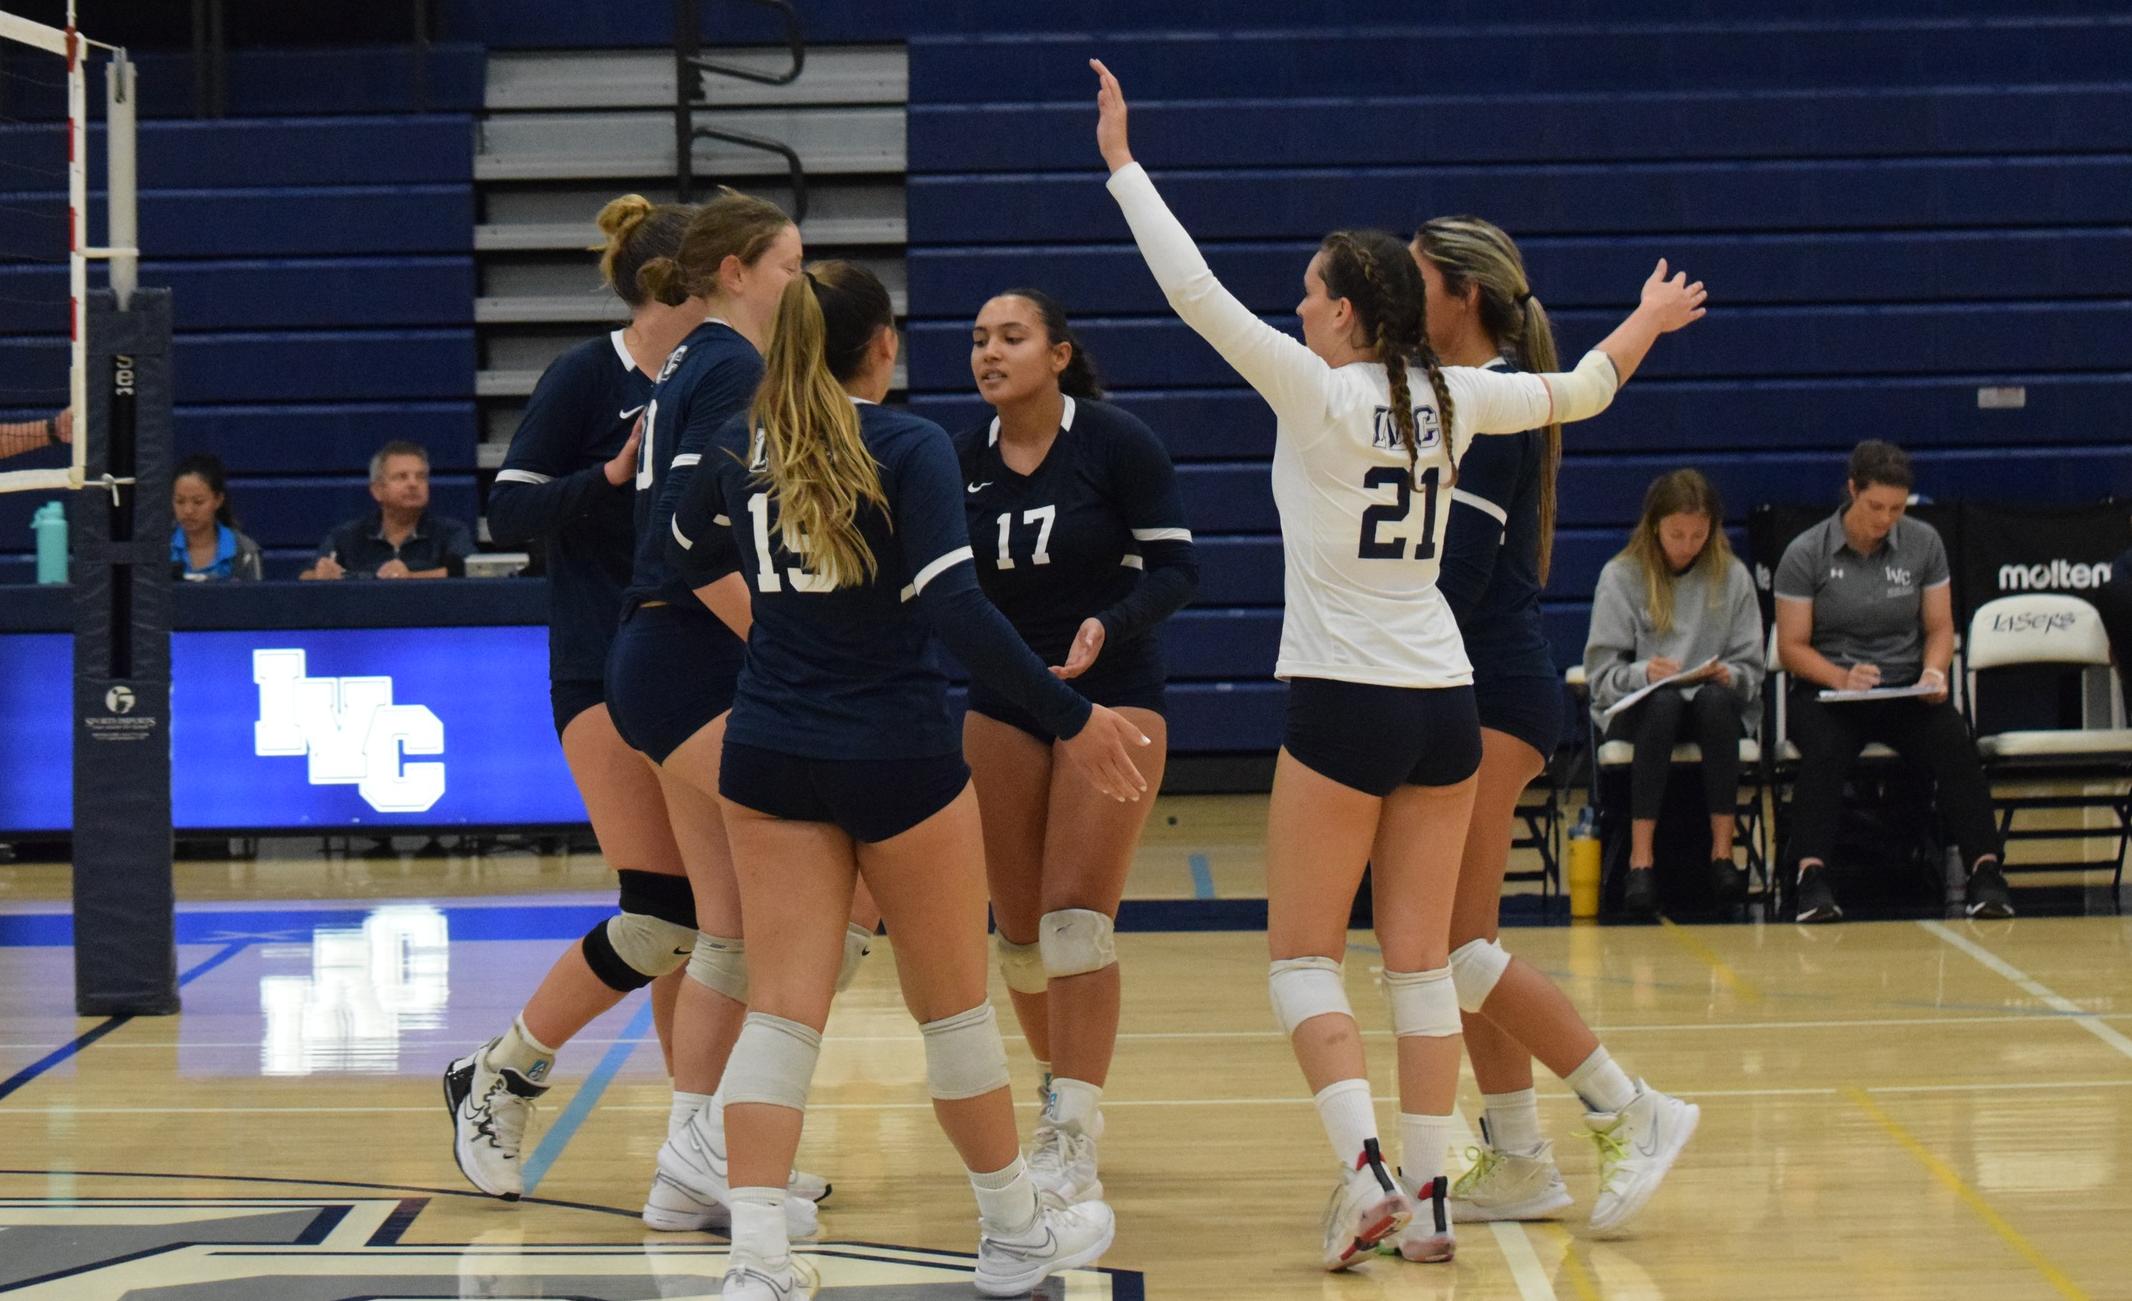 Irvine Valley moves its record to 4-0 with fourth sweep of year